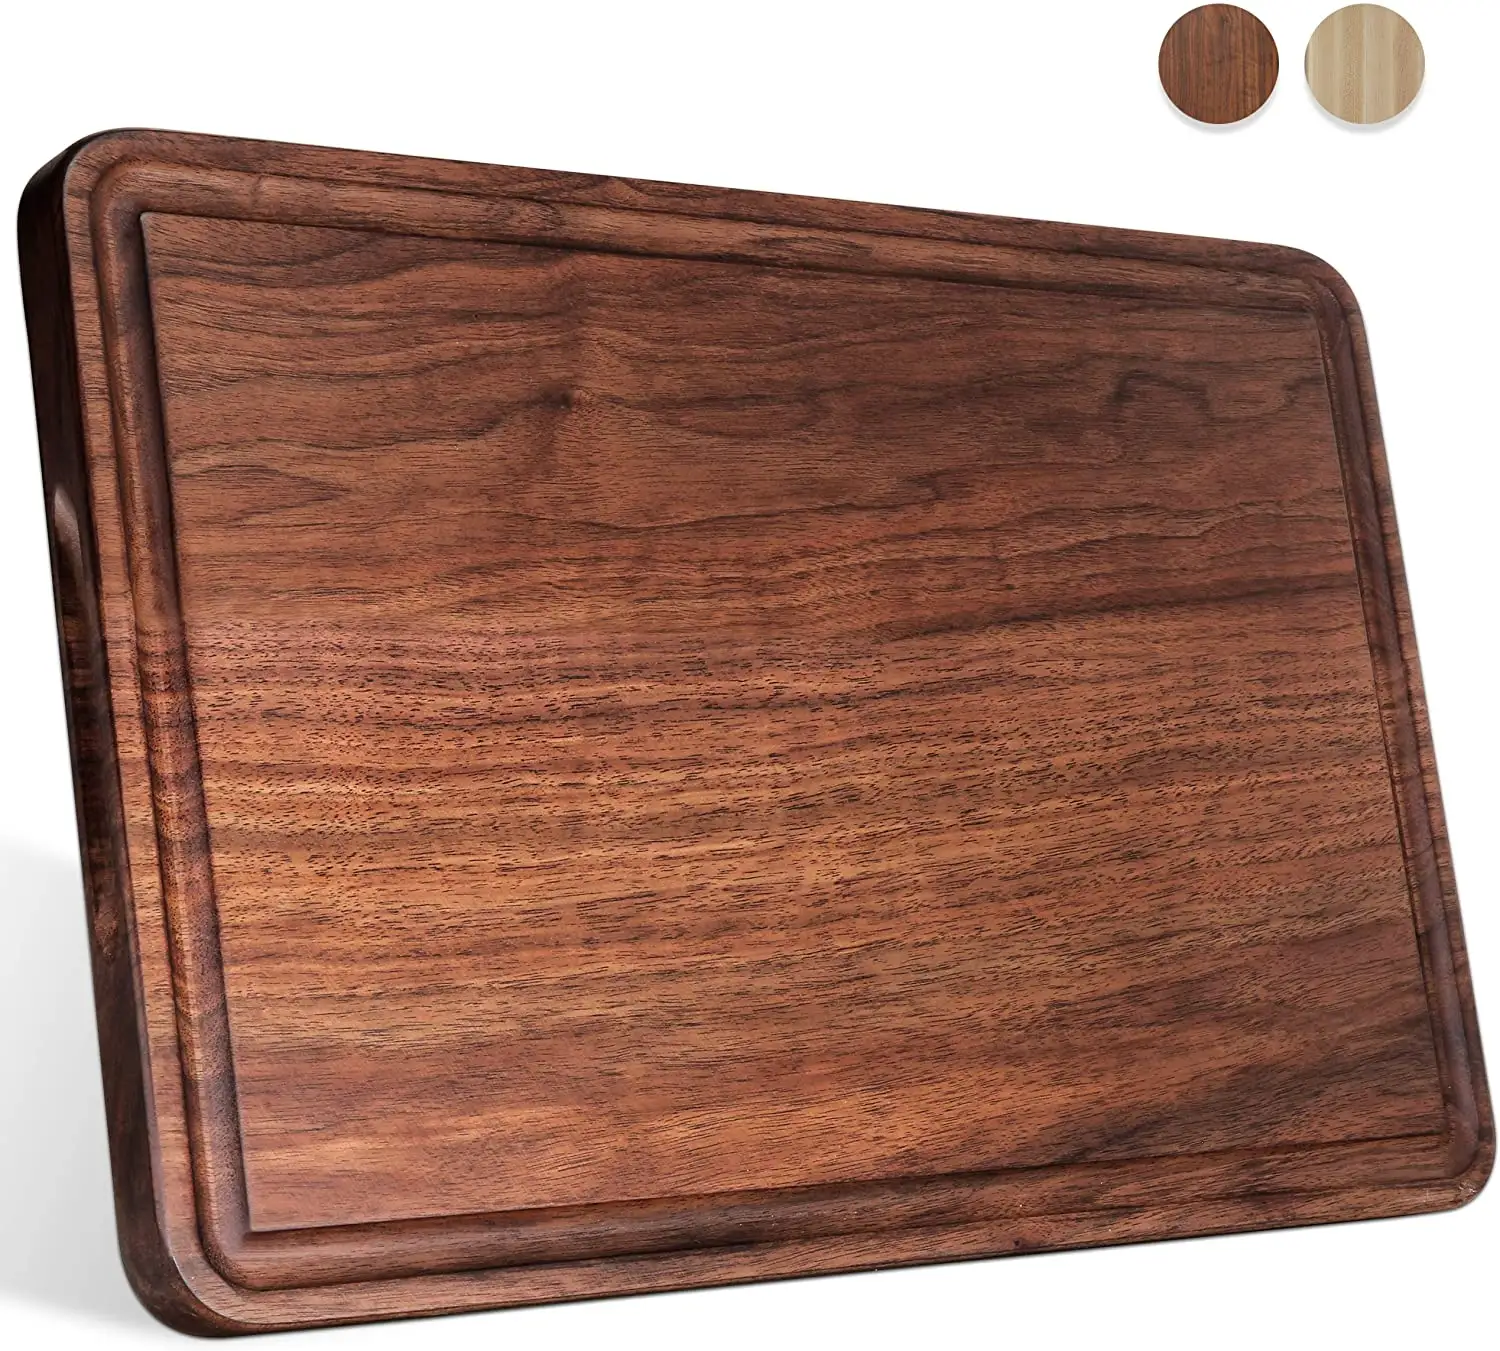 Large Walnut Wood Cutting BoardためKitchen 17 × 11 Cheese Charcuterie Board (Free Gift Box) Extra Thick Reversible Butcher Block